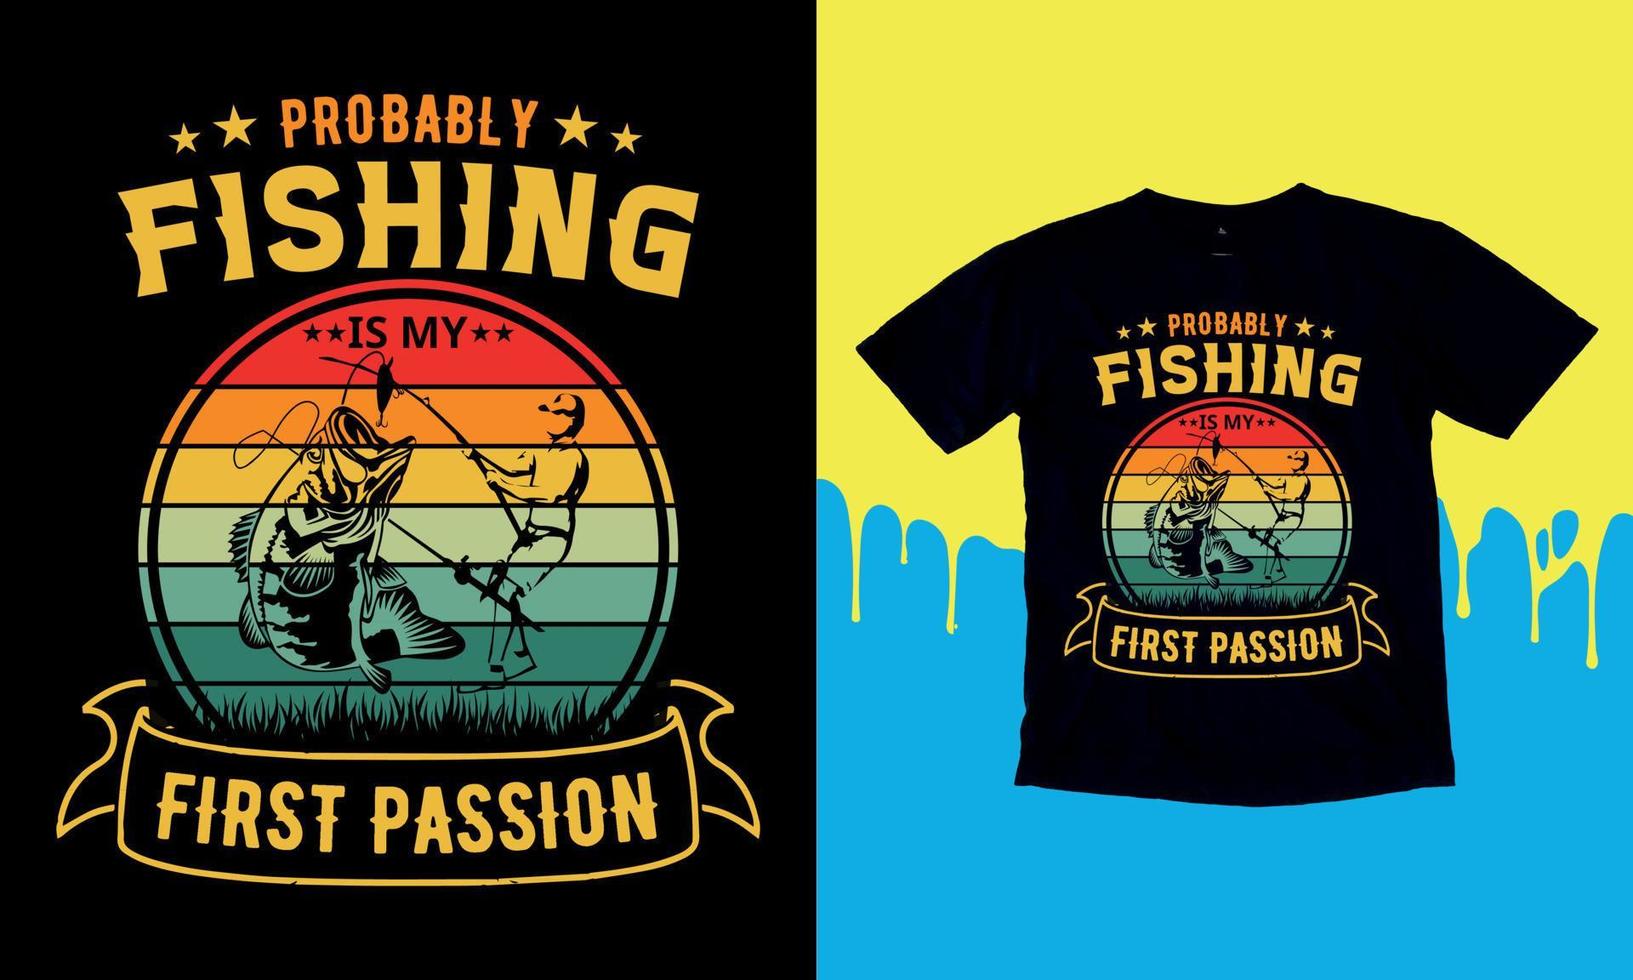 https://static.vecteezy.com/system/resources/previews/016/625/563/non_2x/probably-fishing-is-my-first-passion-t-shirt-gift-men-s-funny-fishing-t-shirts-design-graphic-typographic-poster-or-t-shirt-vector.jpg